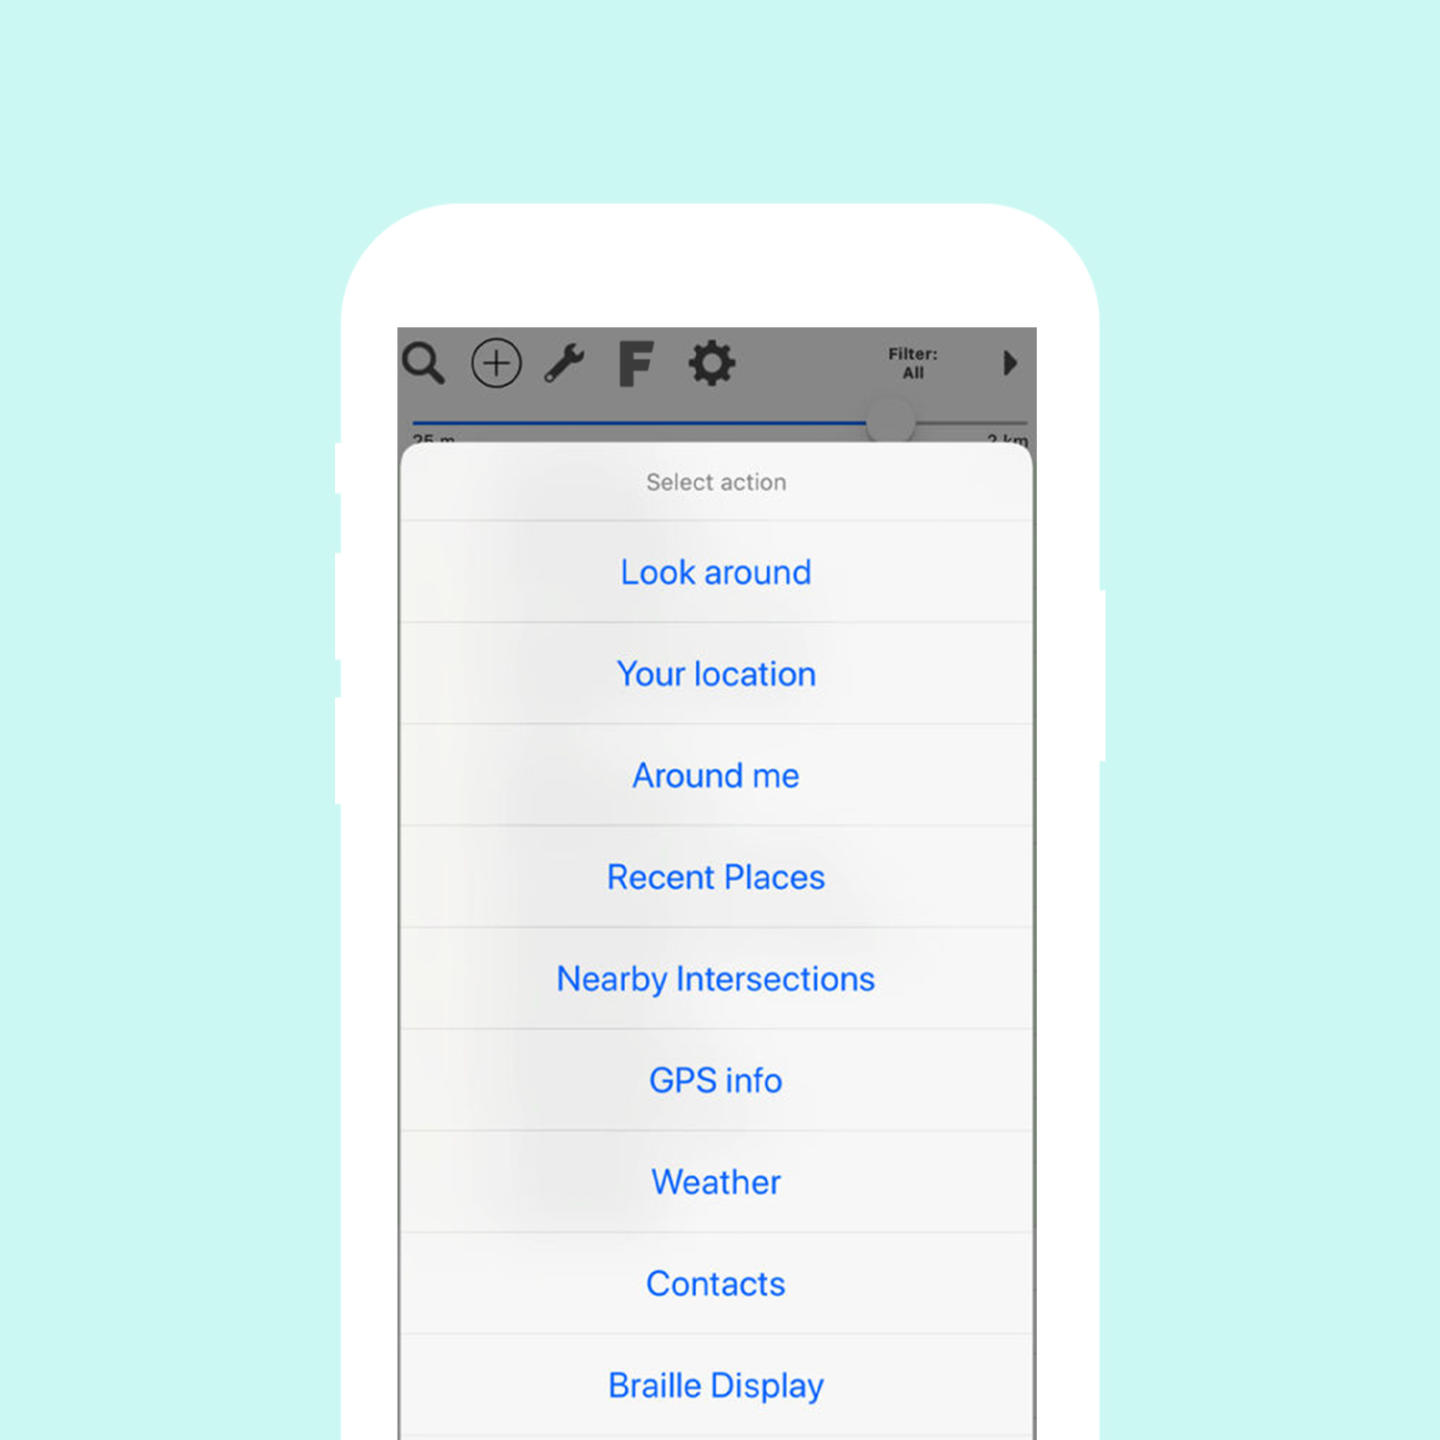 An image of a screen on the Blindsquare app showing. alist of options including "look around", "your location" and "around me".